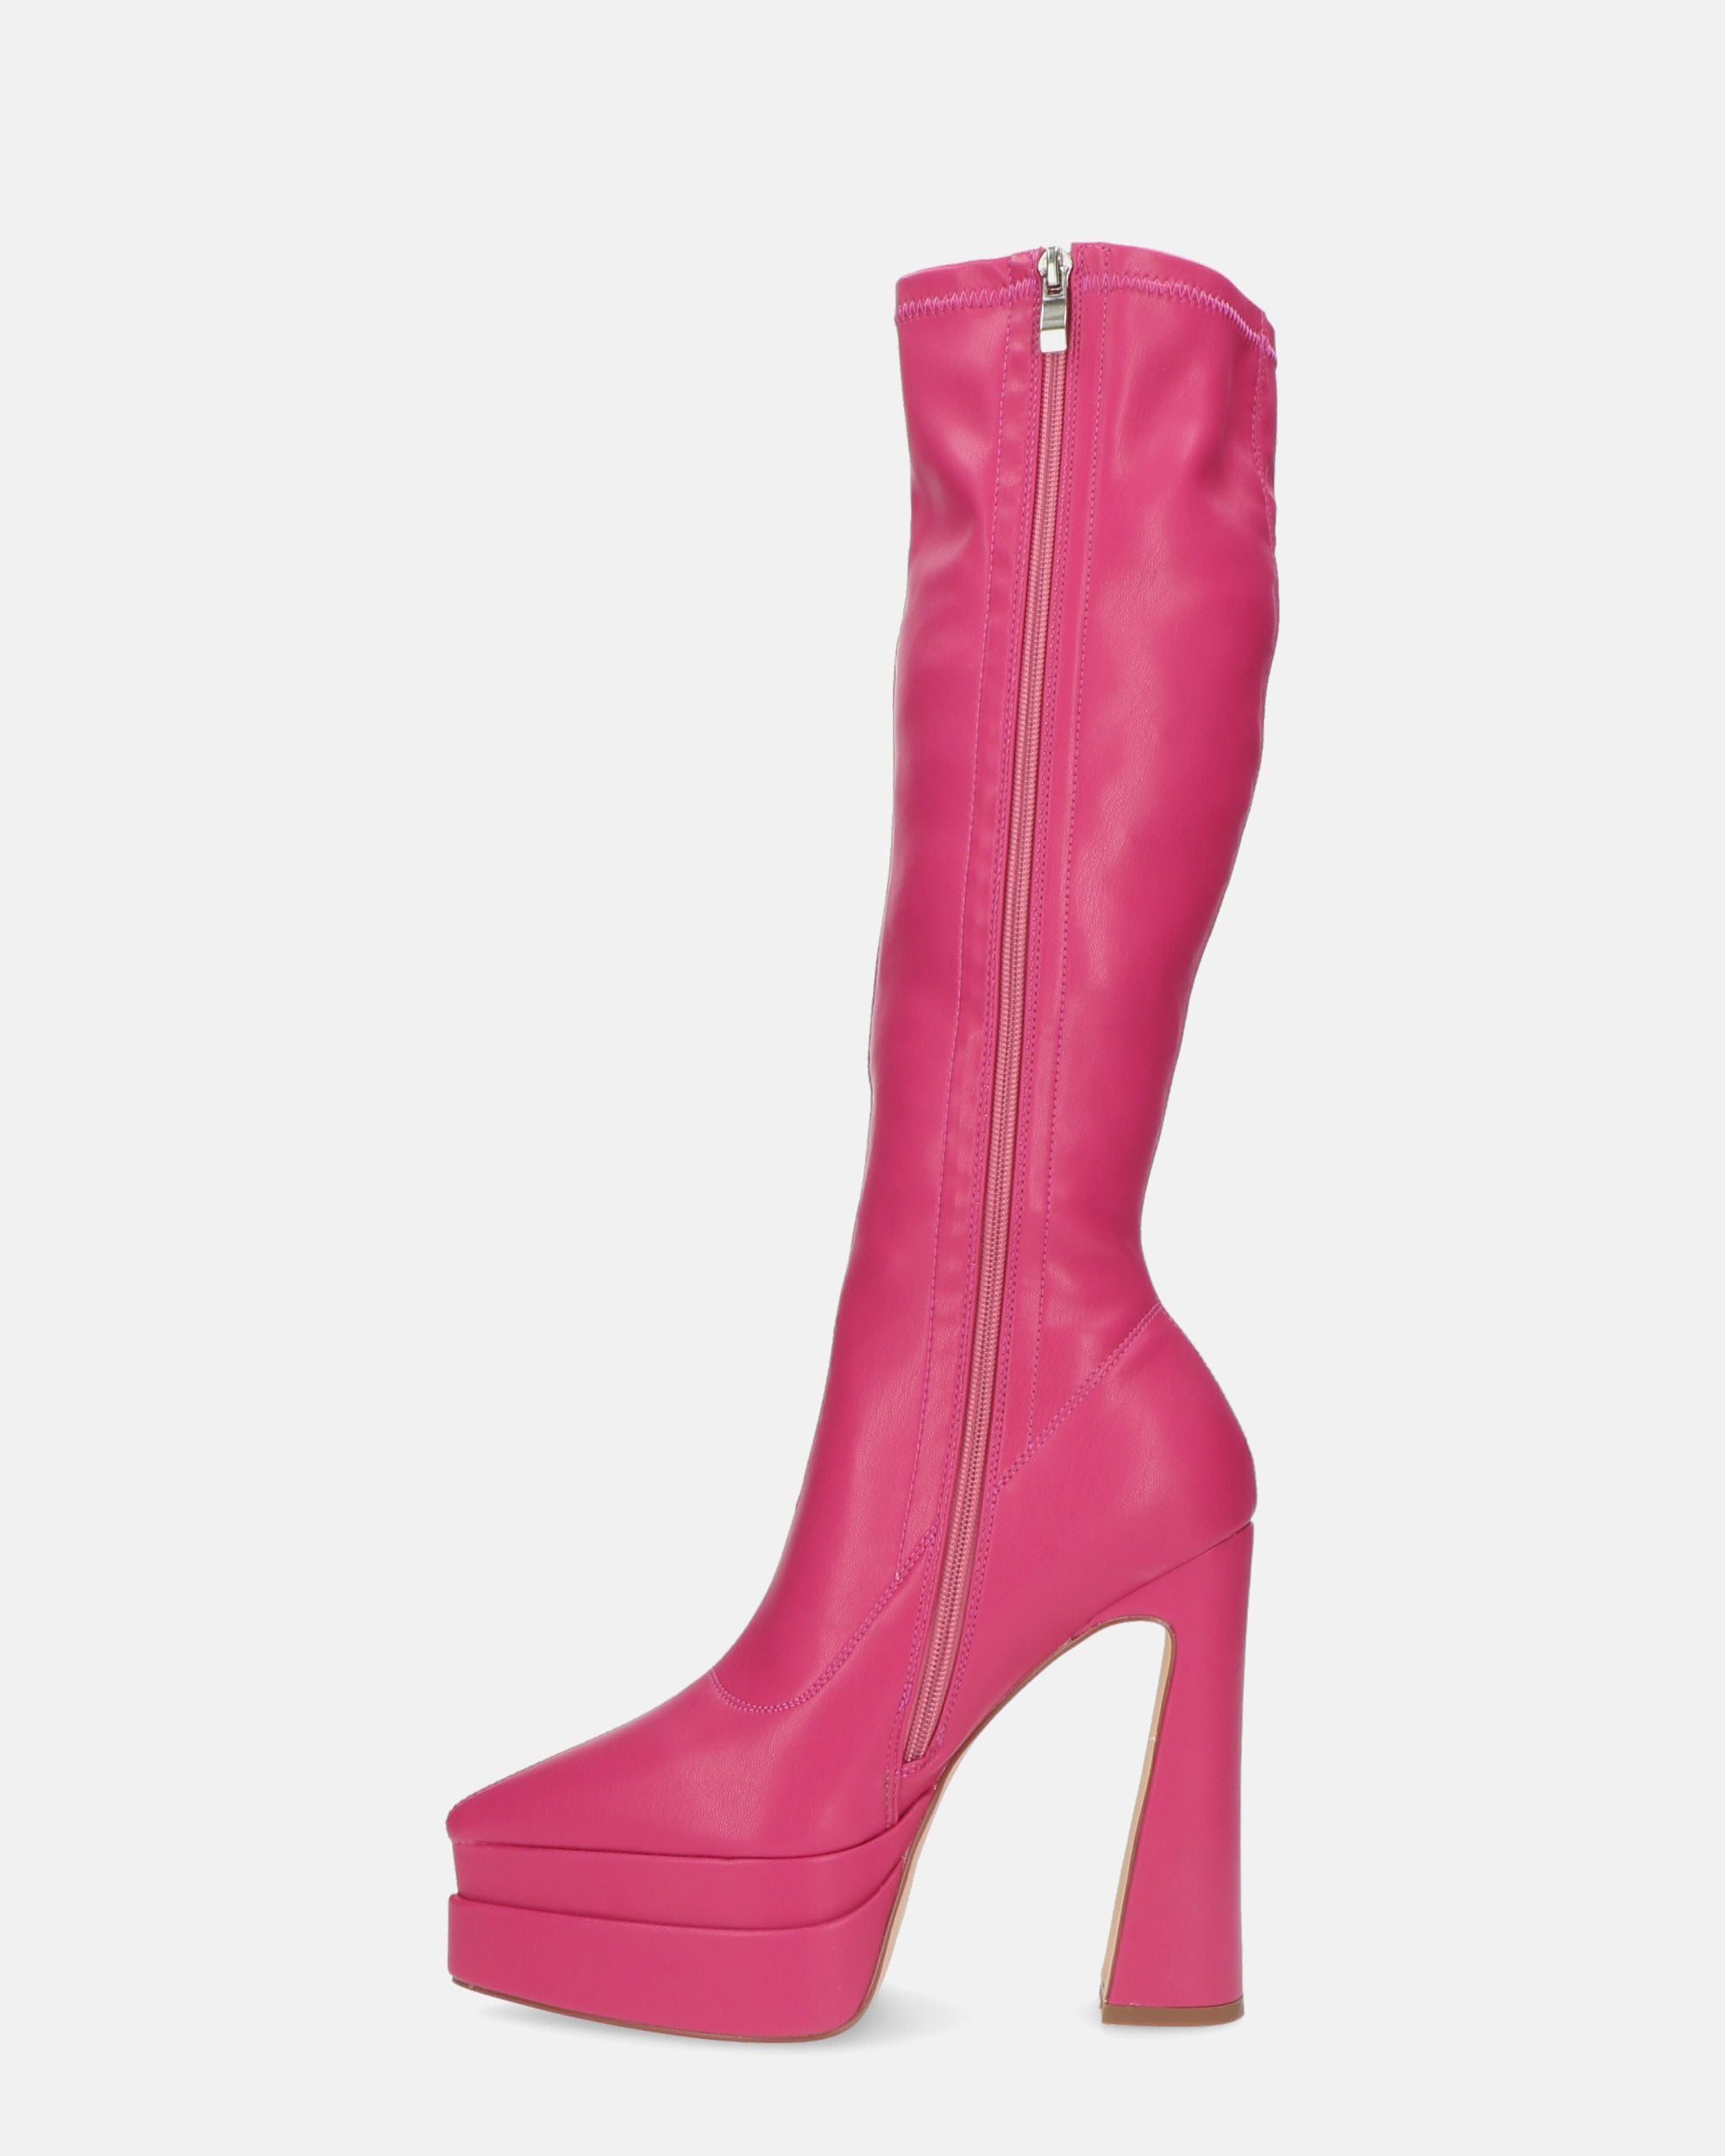 NIKITA - high boots in fuchsia PU with pointed platform